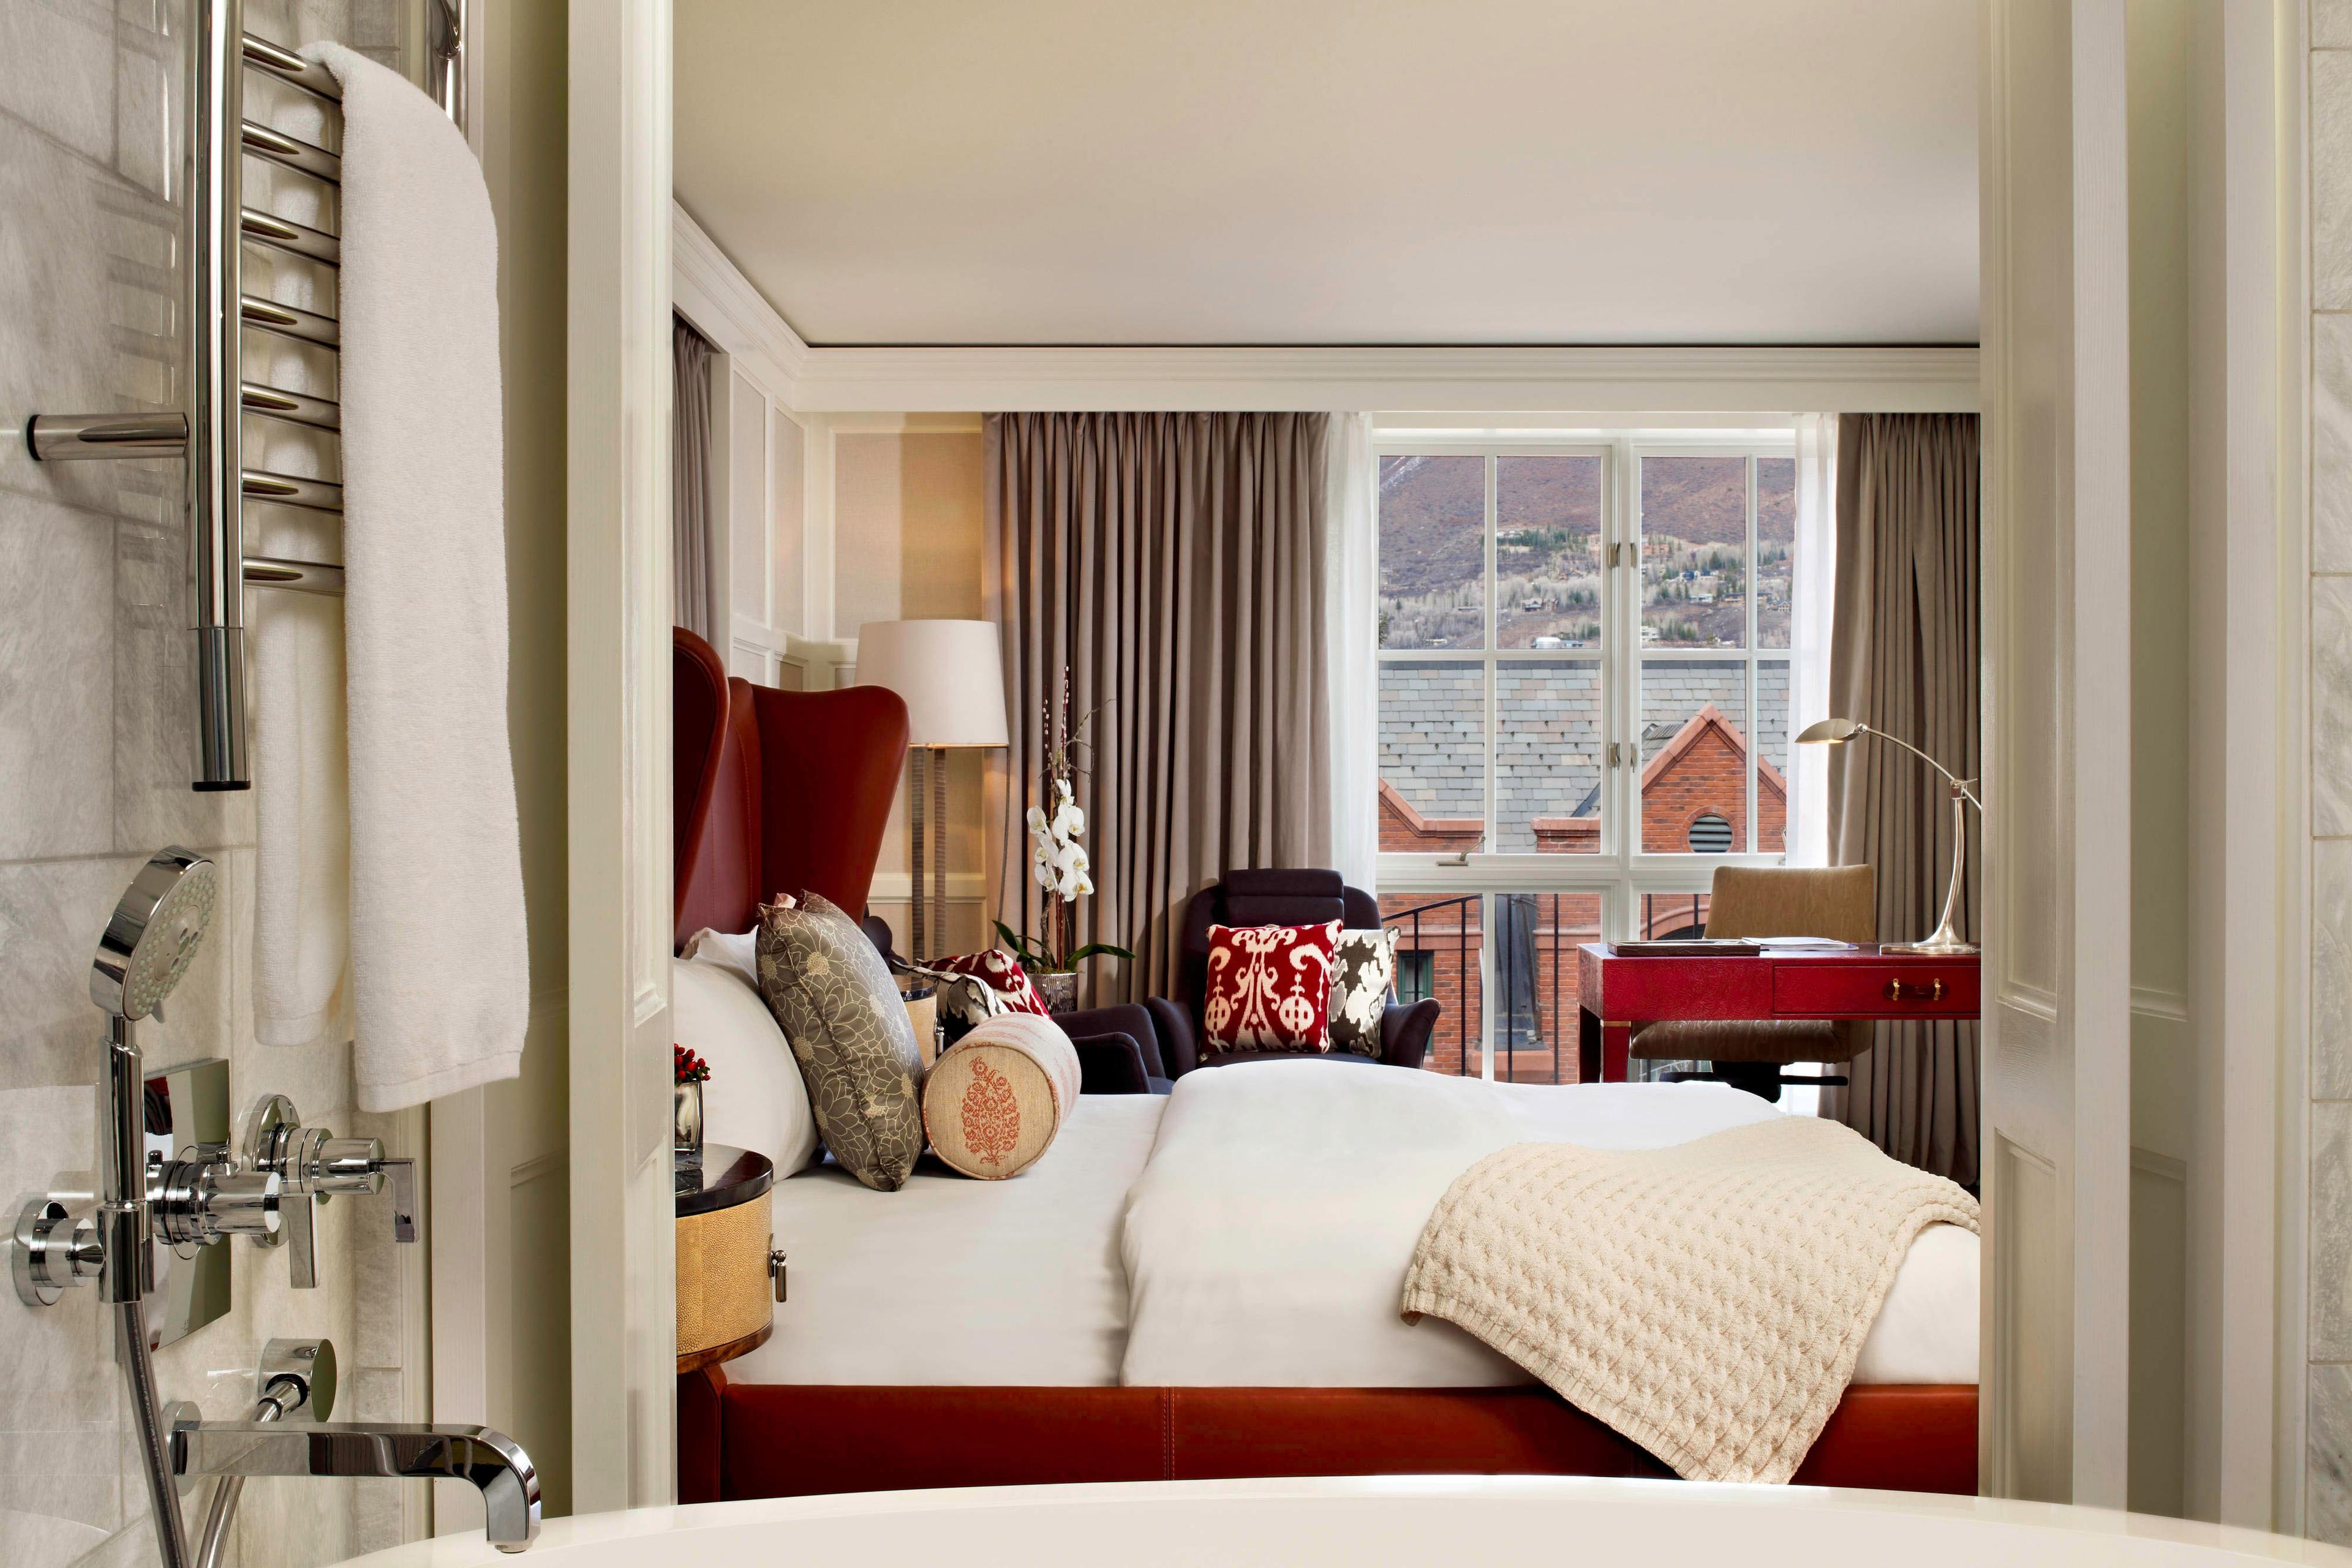 Our expertly designed guest room provides visitors with the amenities they need for a relaxing stay in Aspen, including a luxury king bed with a fluffy duvet, Frette linens and soft blankets.